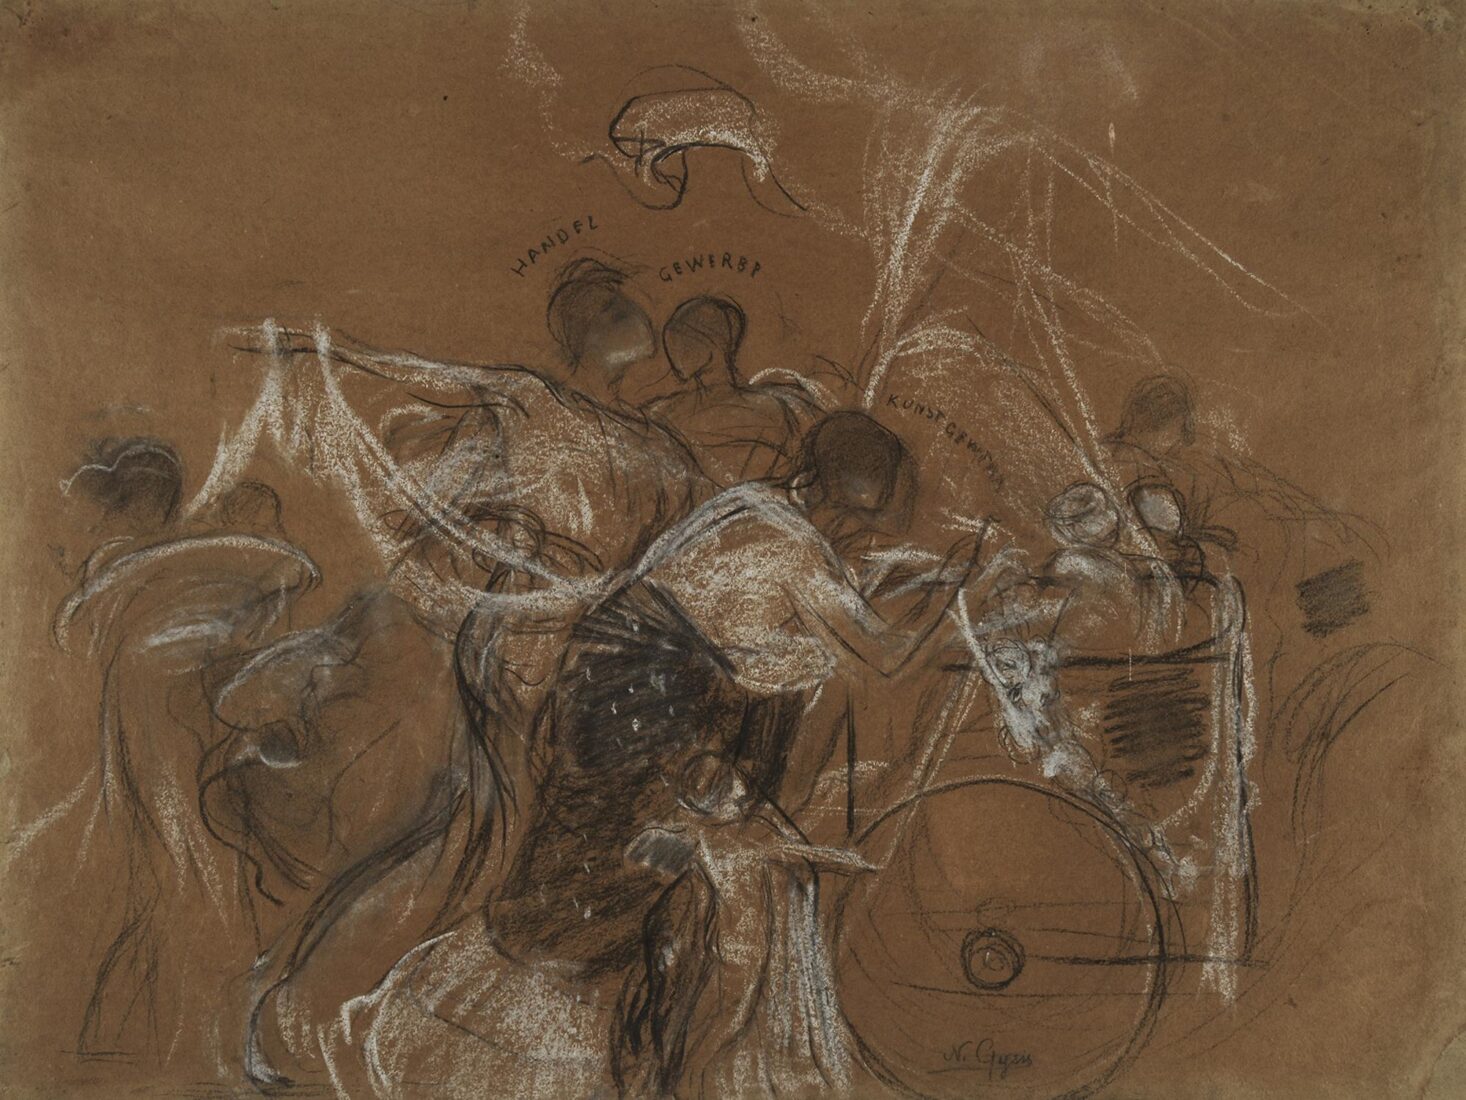 Movement Study of the Allegorical Figures around the Chariot